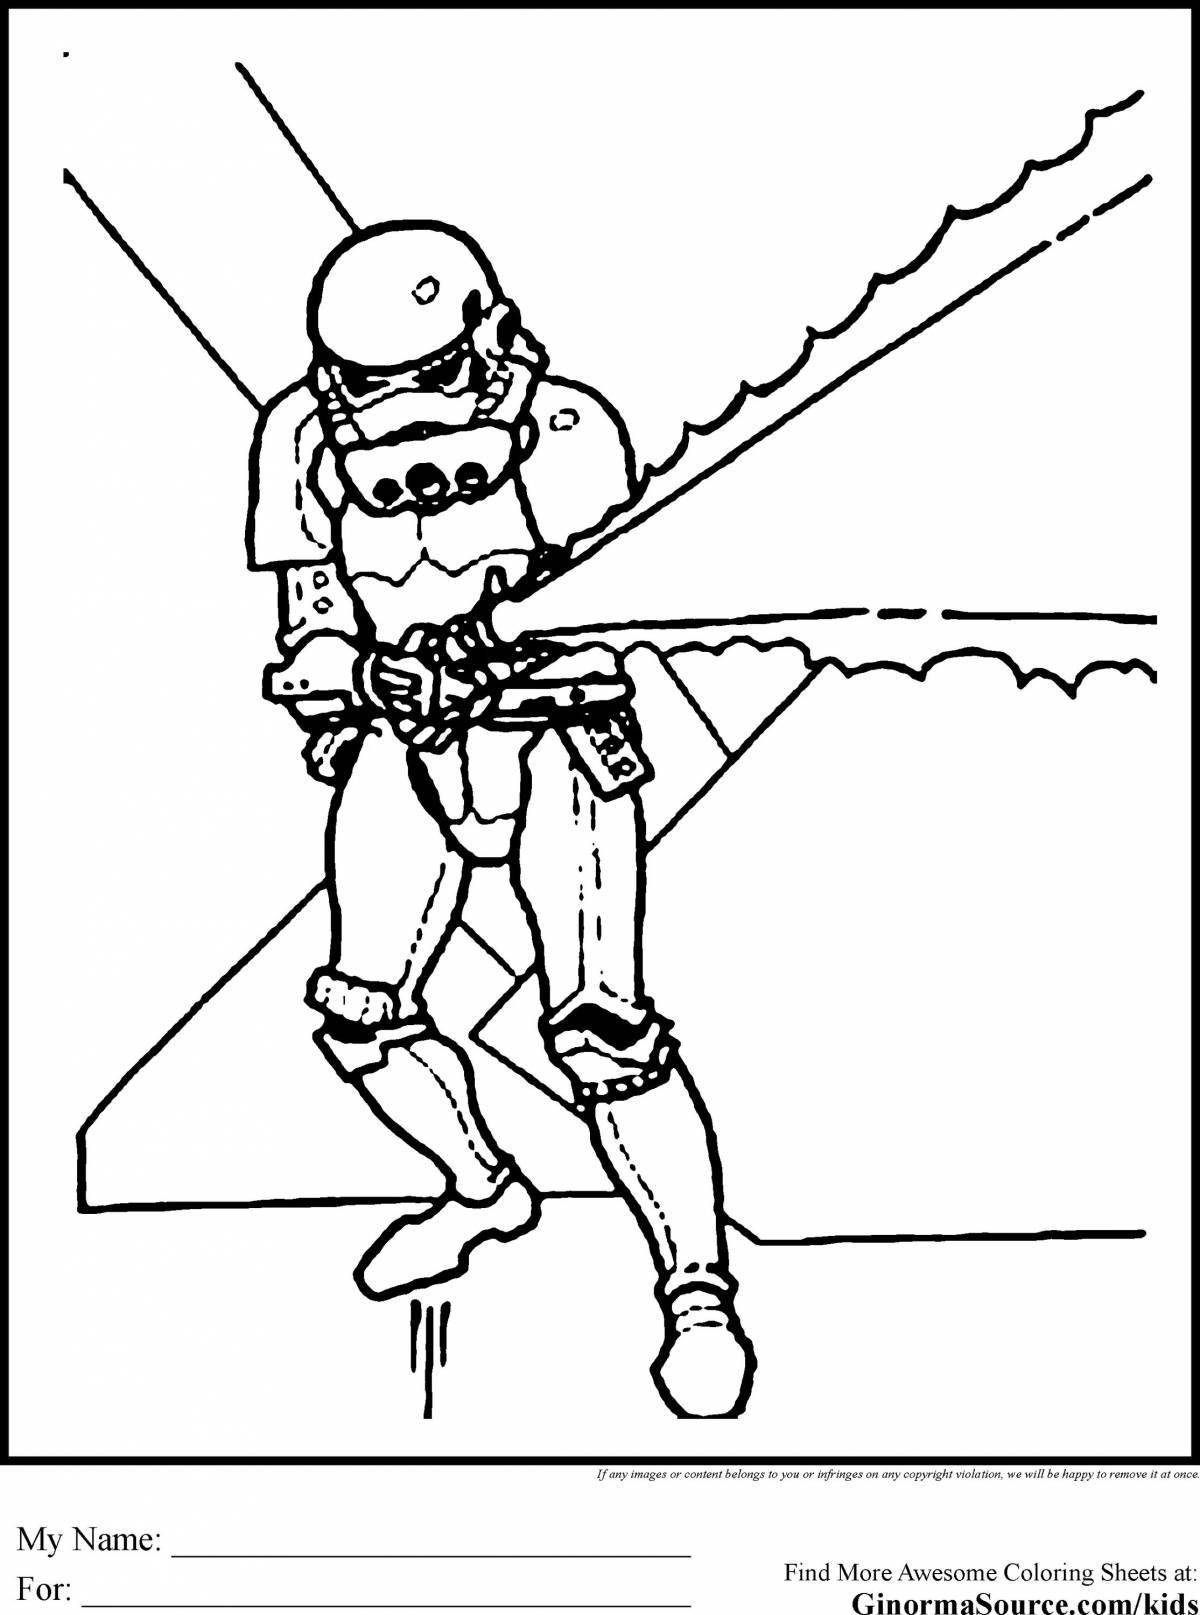 Famous star wars stormtrooper coloring page